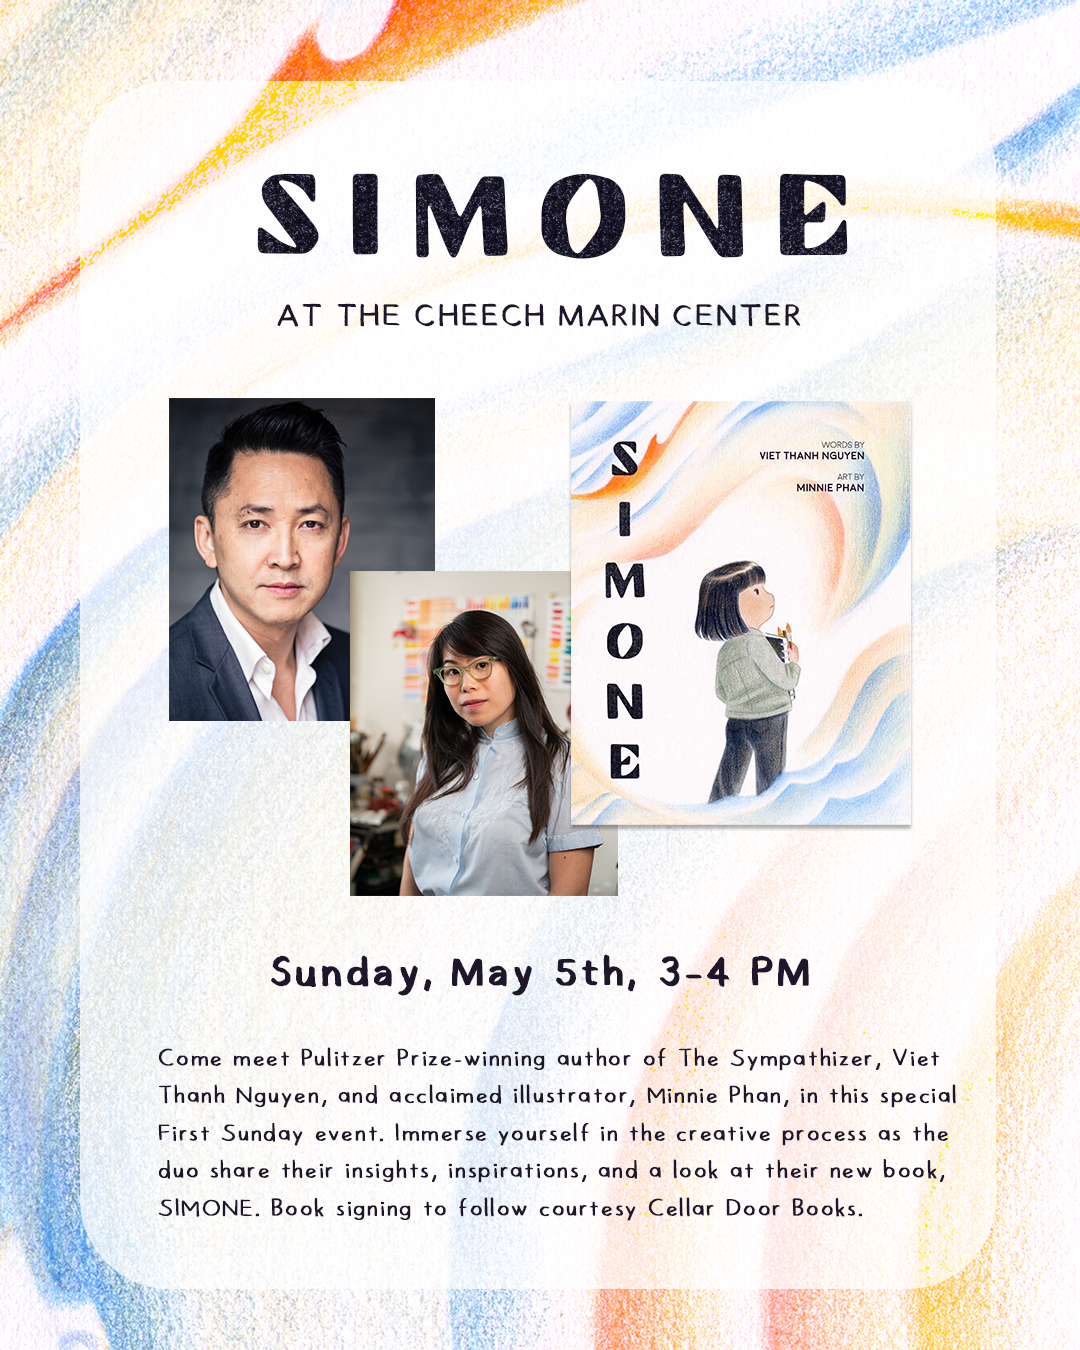 FREE EVENT – Simone Presentation by author Viet Thanh Nguyen and Illustrator Minnie Phan